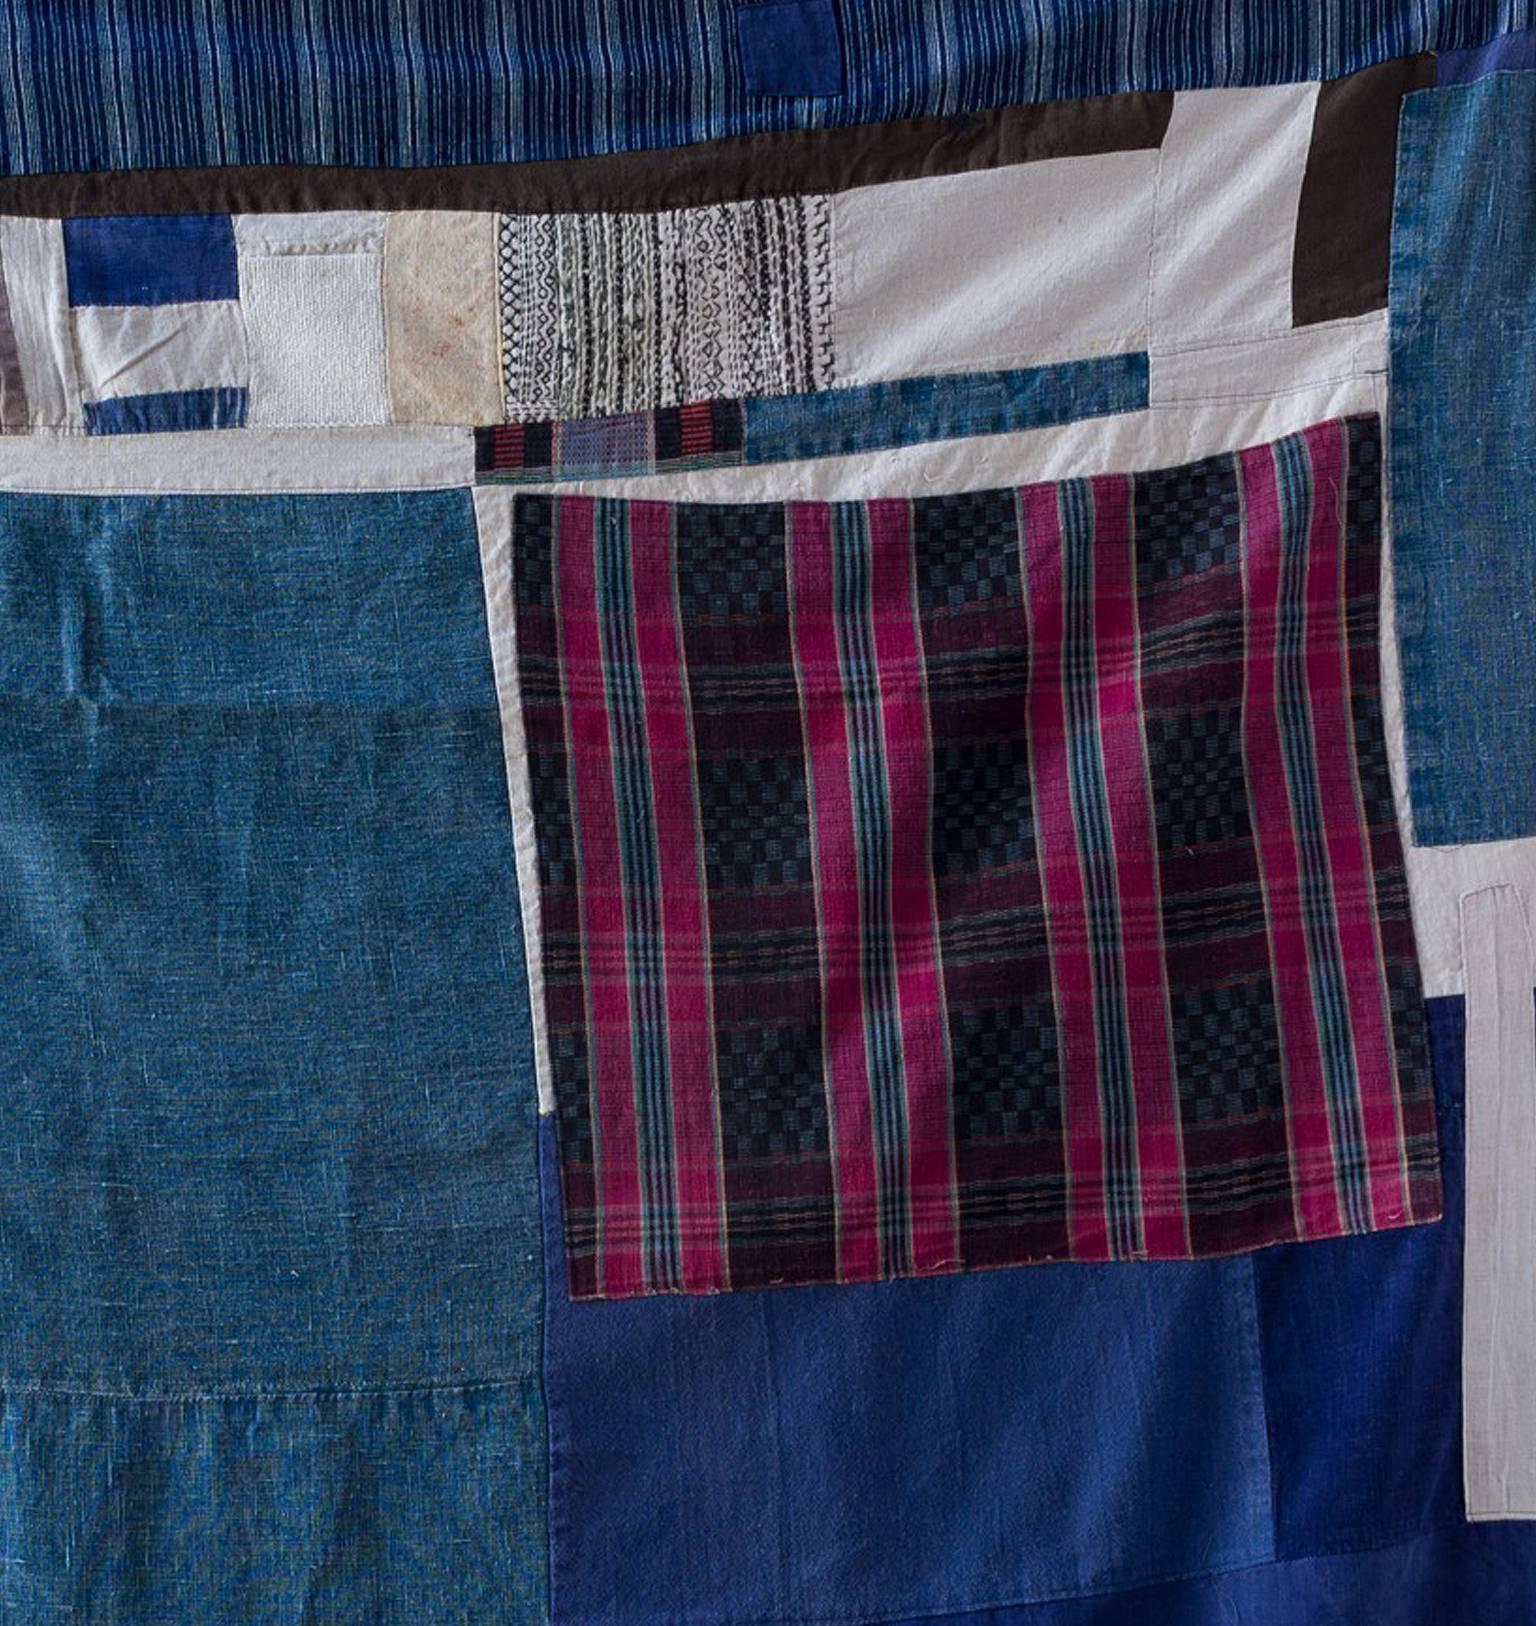 Lap blanket made from vintage fabrics. Piecework composition of Hebei cotton futon covers: Indigo and hand-loomed plaids, ethnic minority textiles, Guatemalan handwoven stripes and contemporary linens. Two layers lined with coordinating linen on